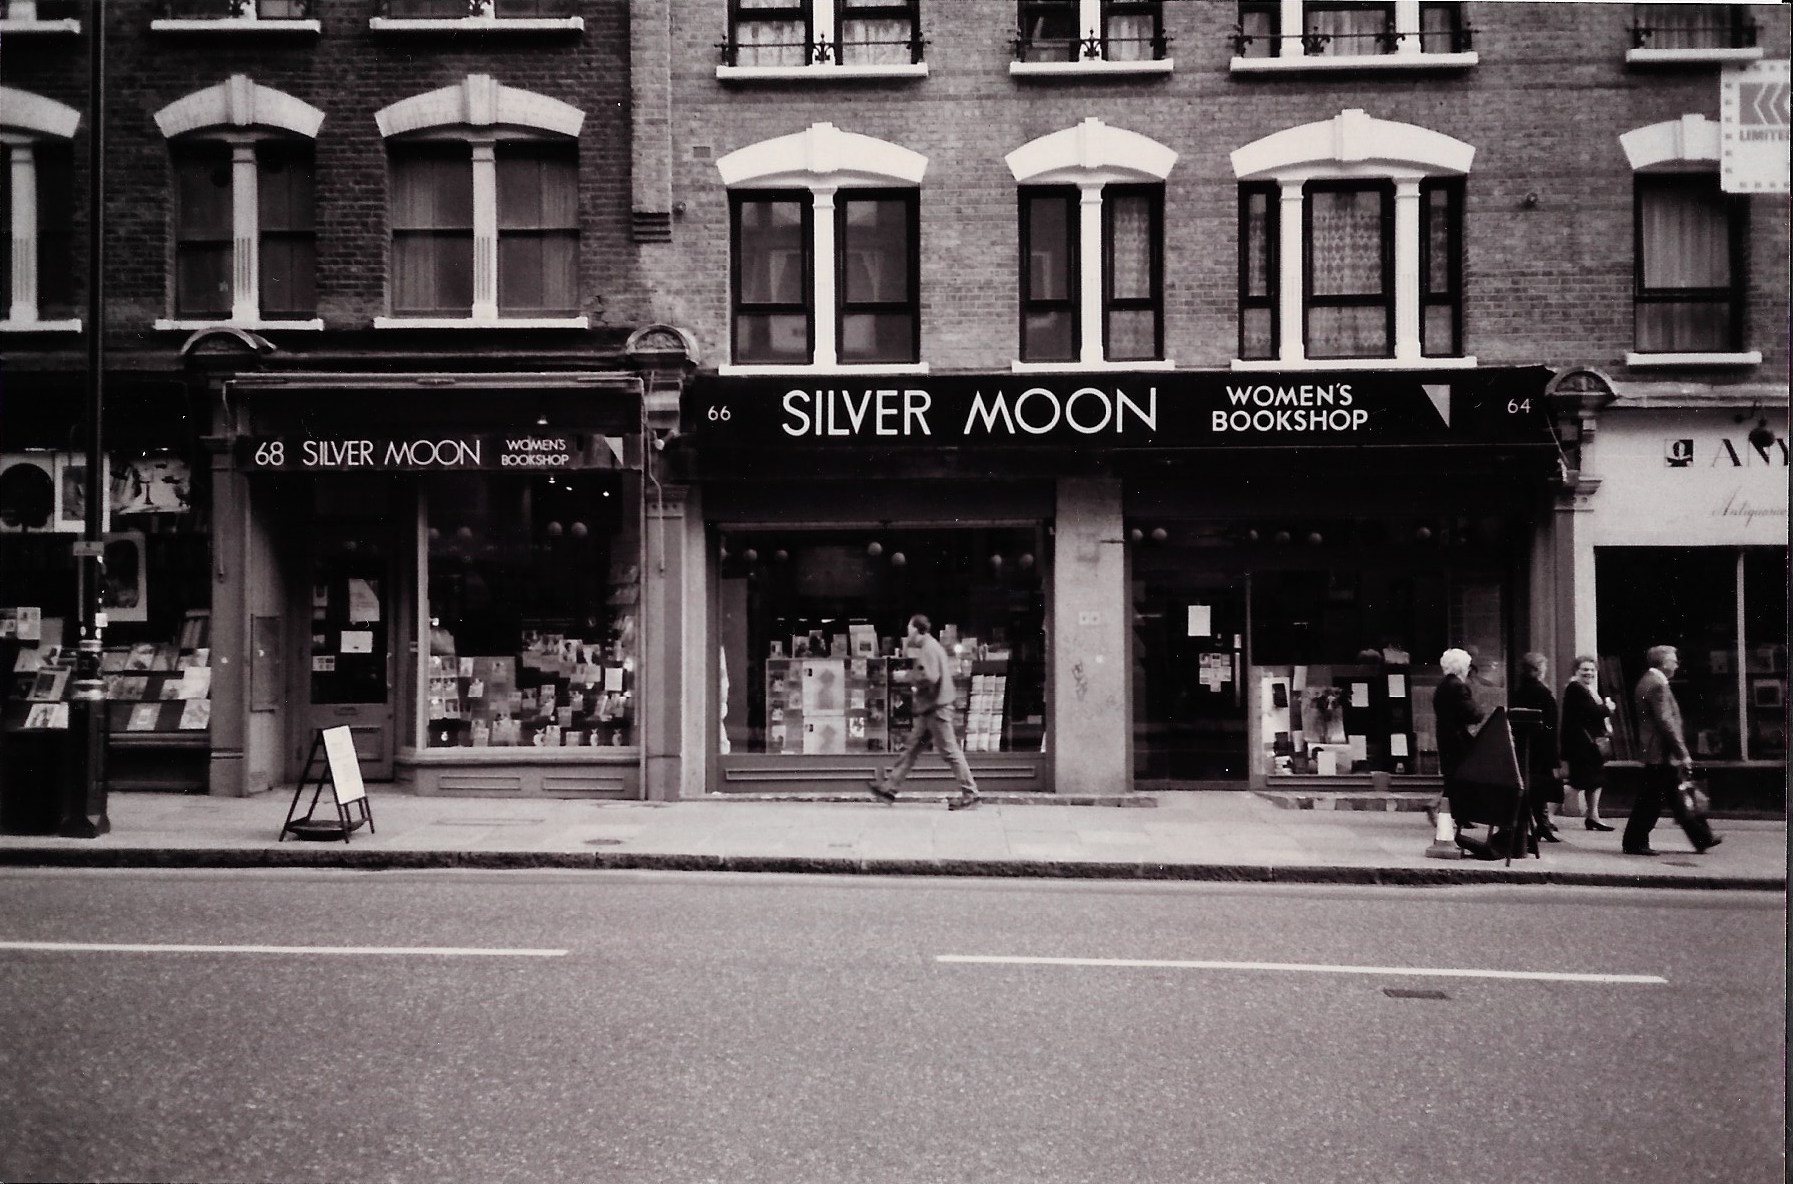 Black and white photo of the front of the Silver Moon Bookshop photographed from the street with pedestrians walking past.